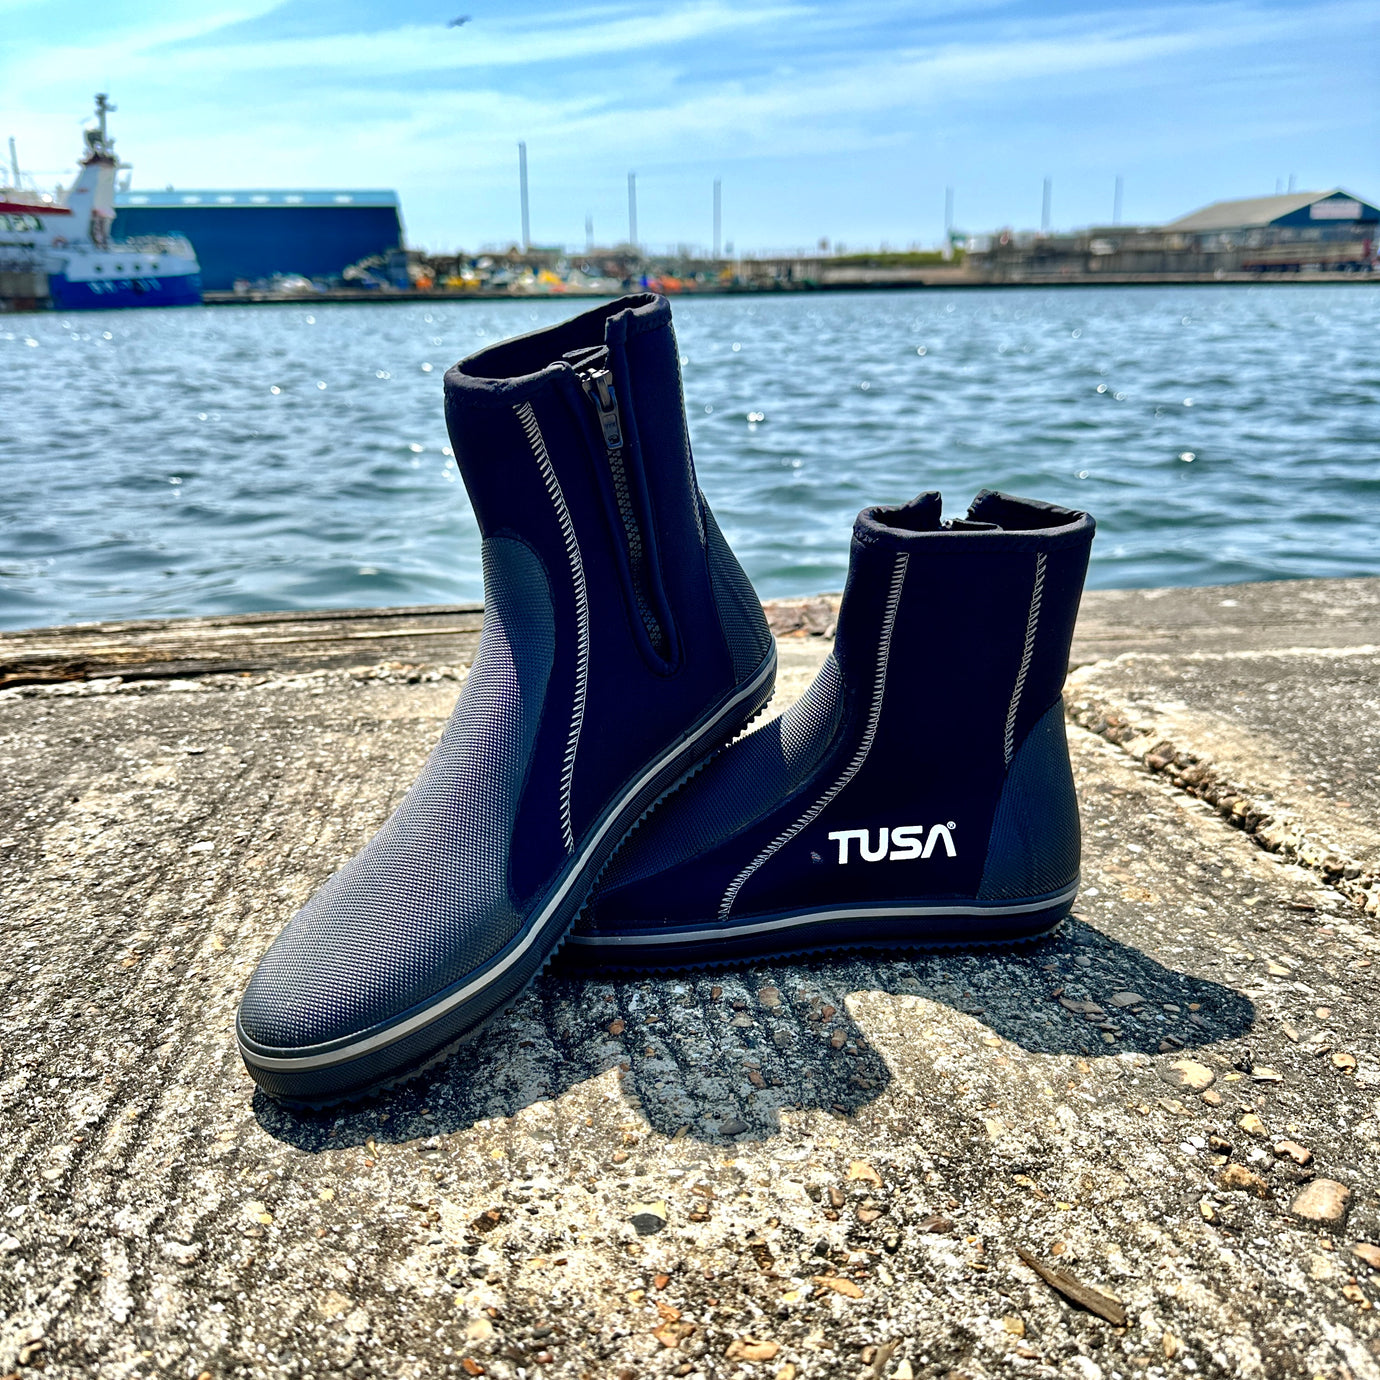 TUSA-Boots-By-Oyster-Diving